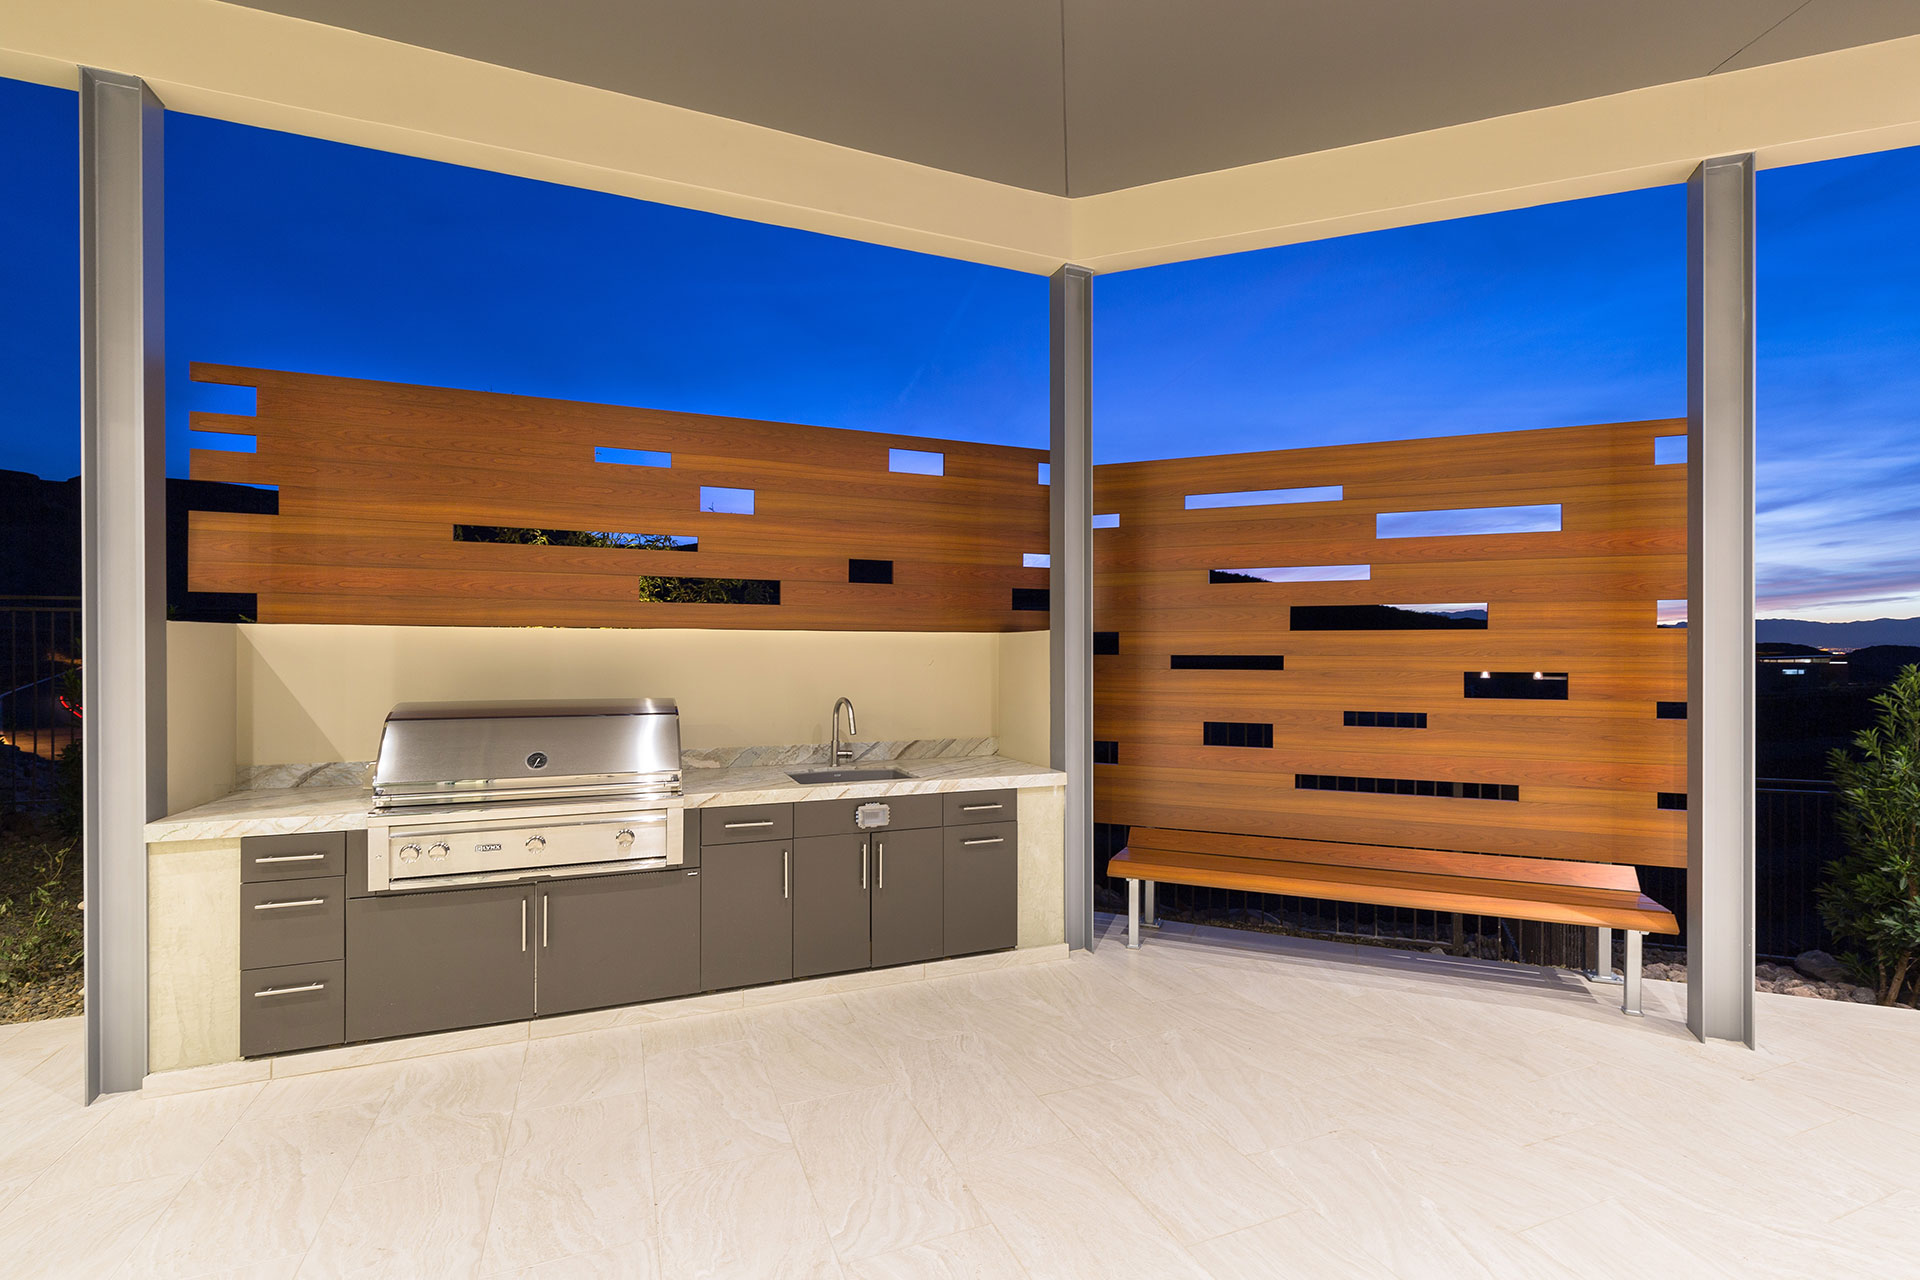 A stainless steel built-in backward bbq with wood-like aluminum fencing and bench atop light beige tiled flooring and a rich blue twilight sky in the background.